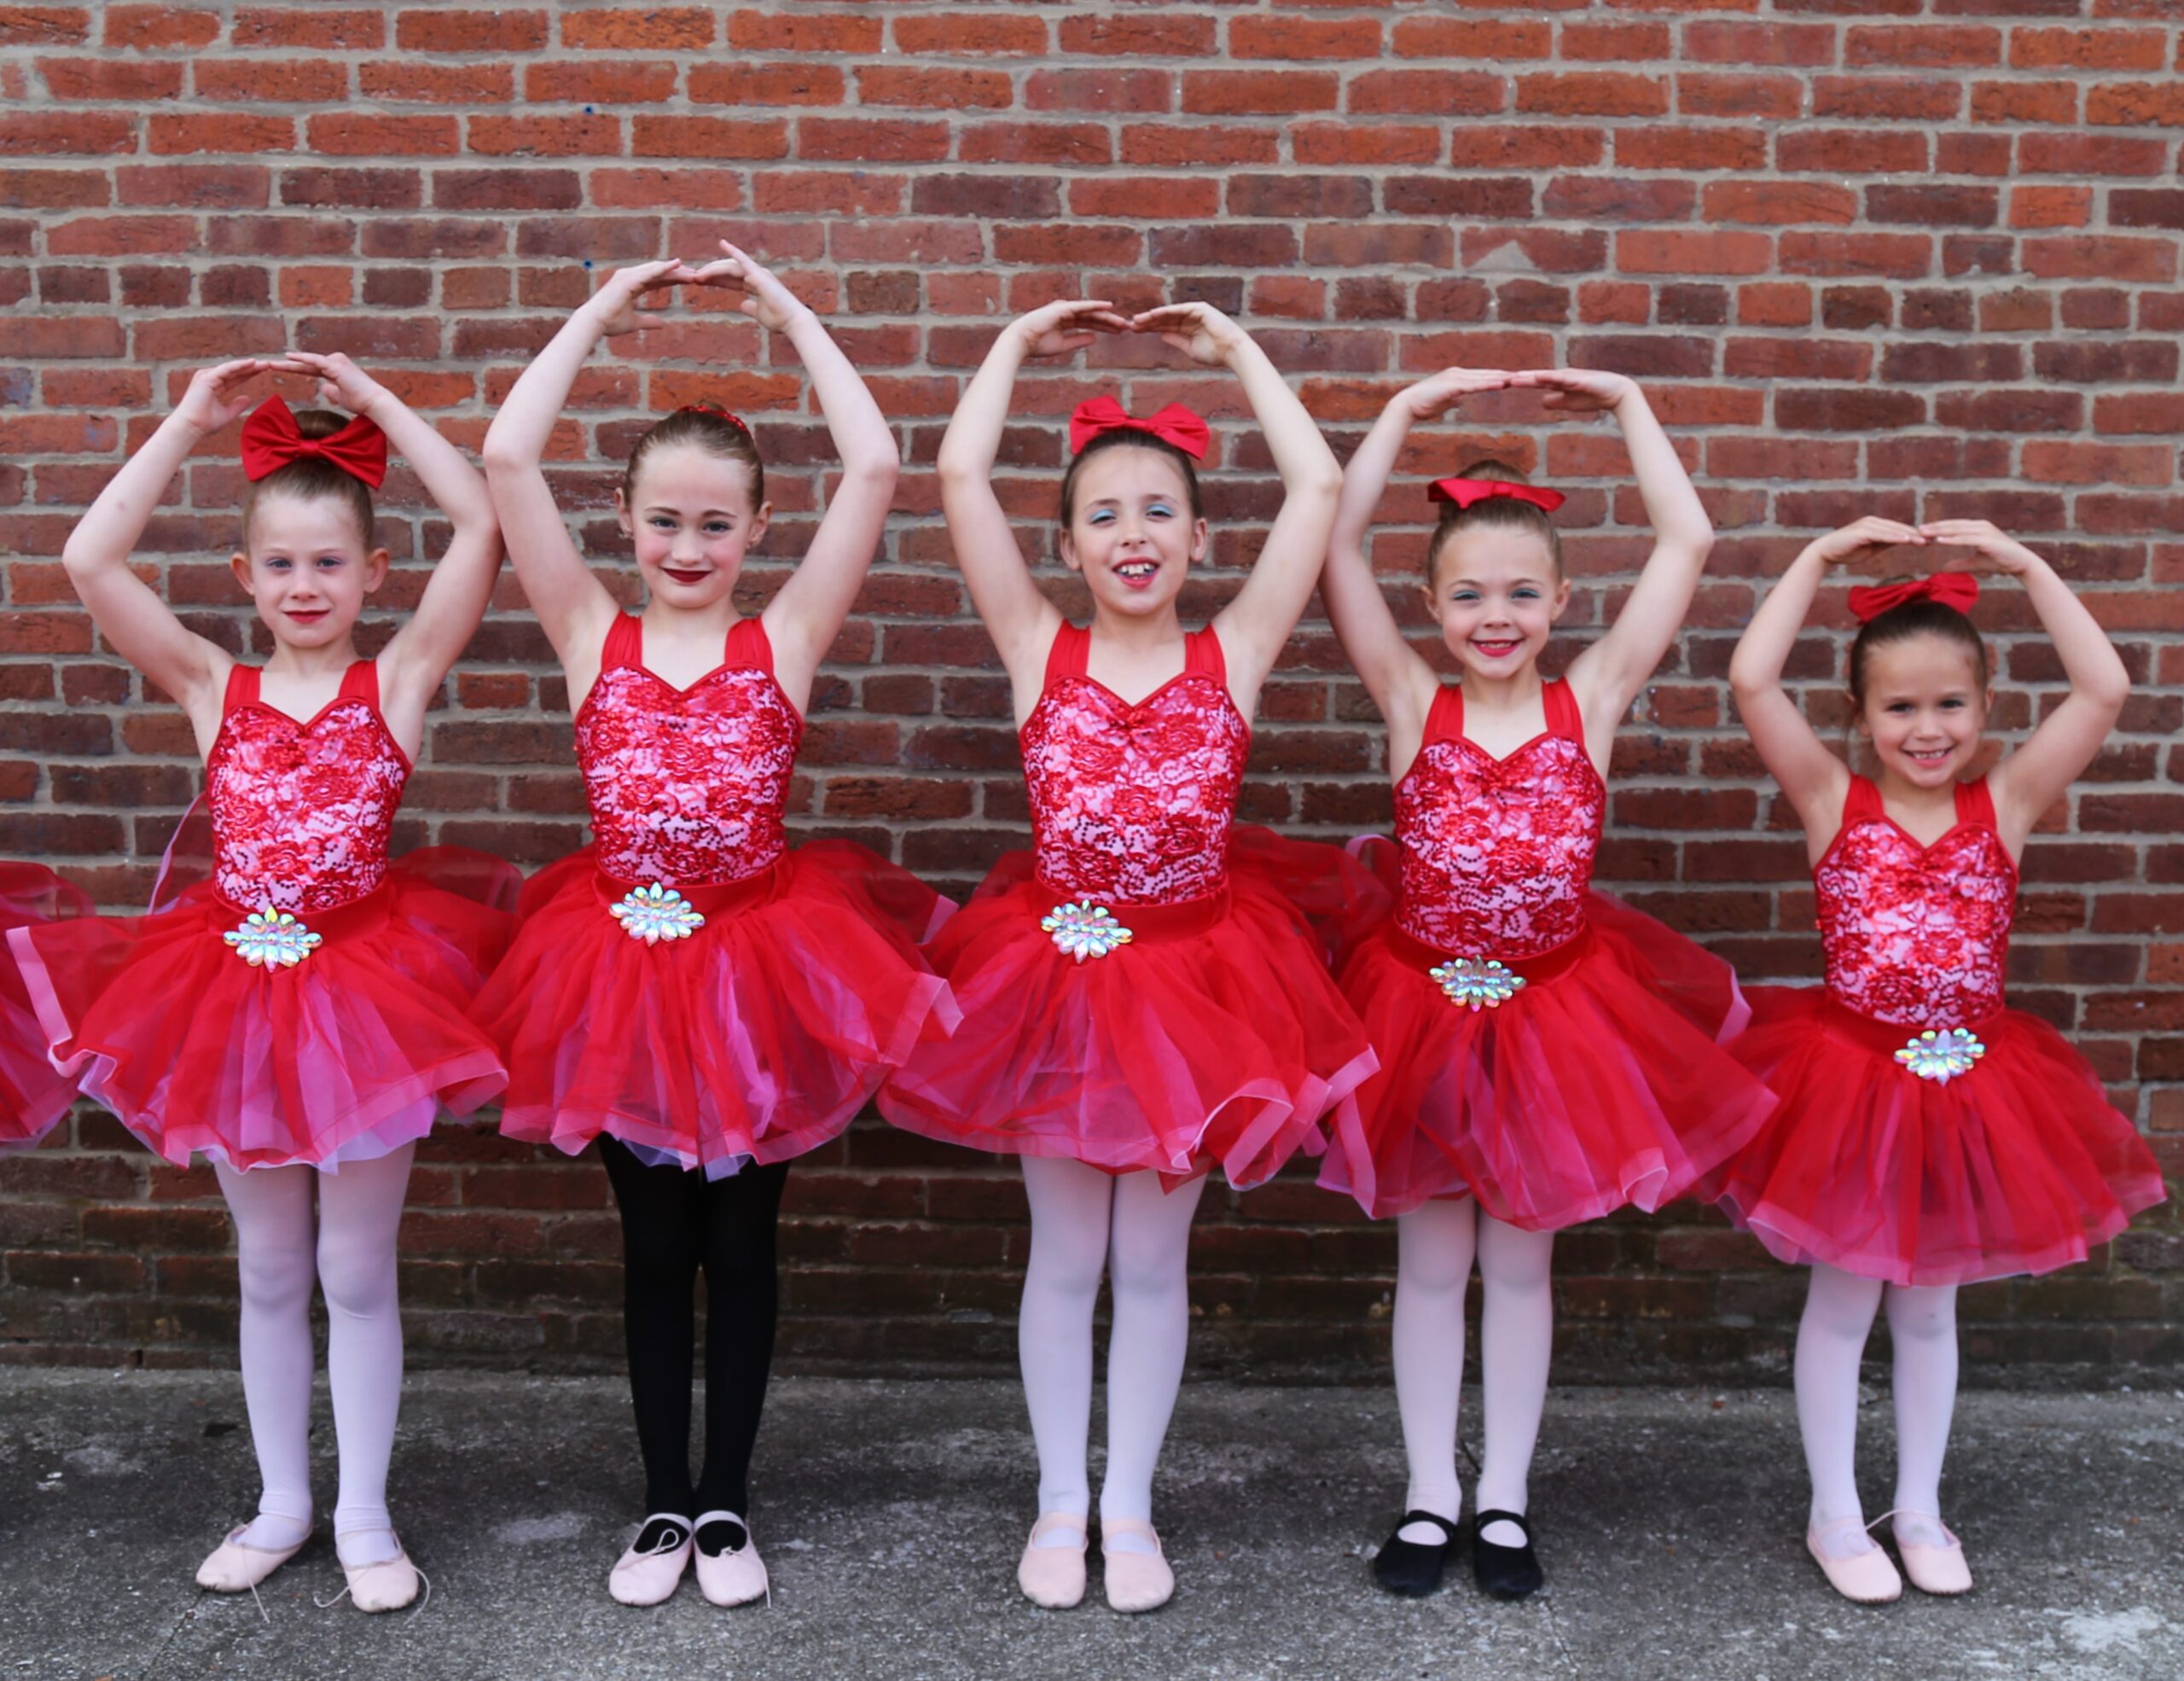 Ballet Tap group posing in red tutus against a brick wall